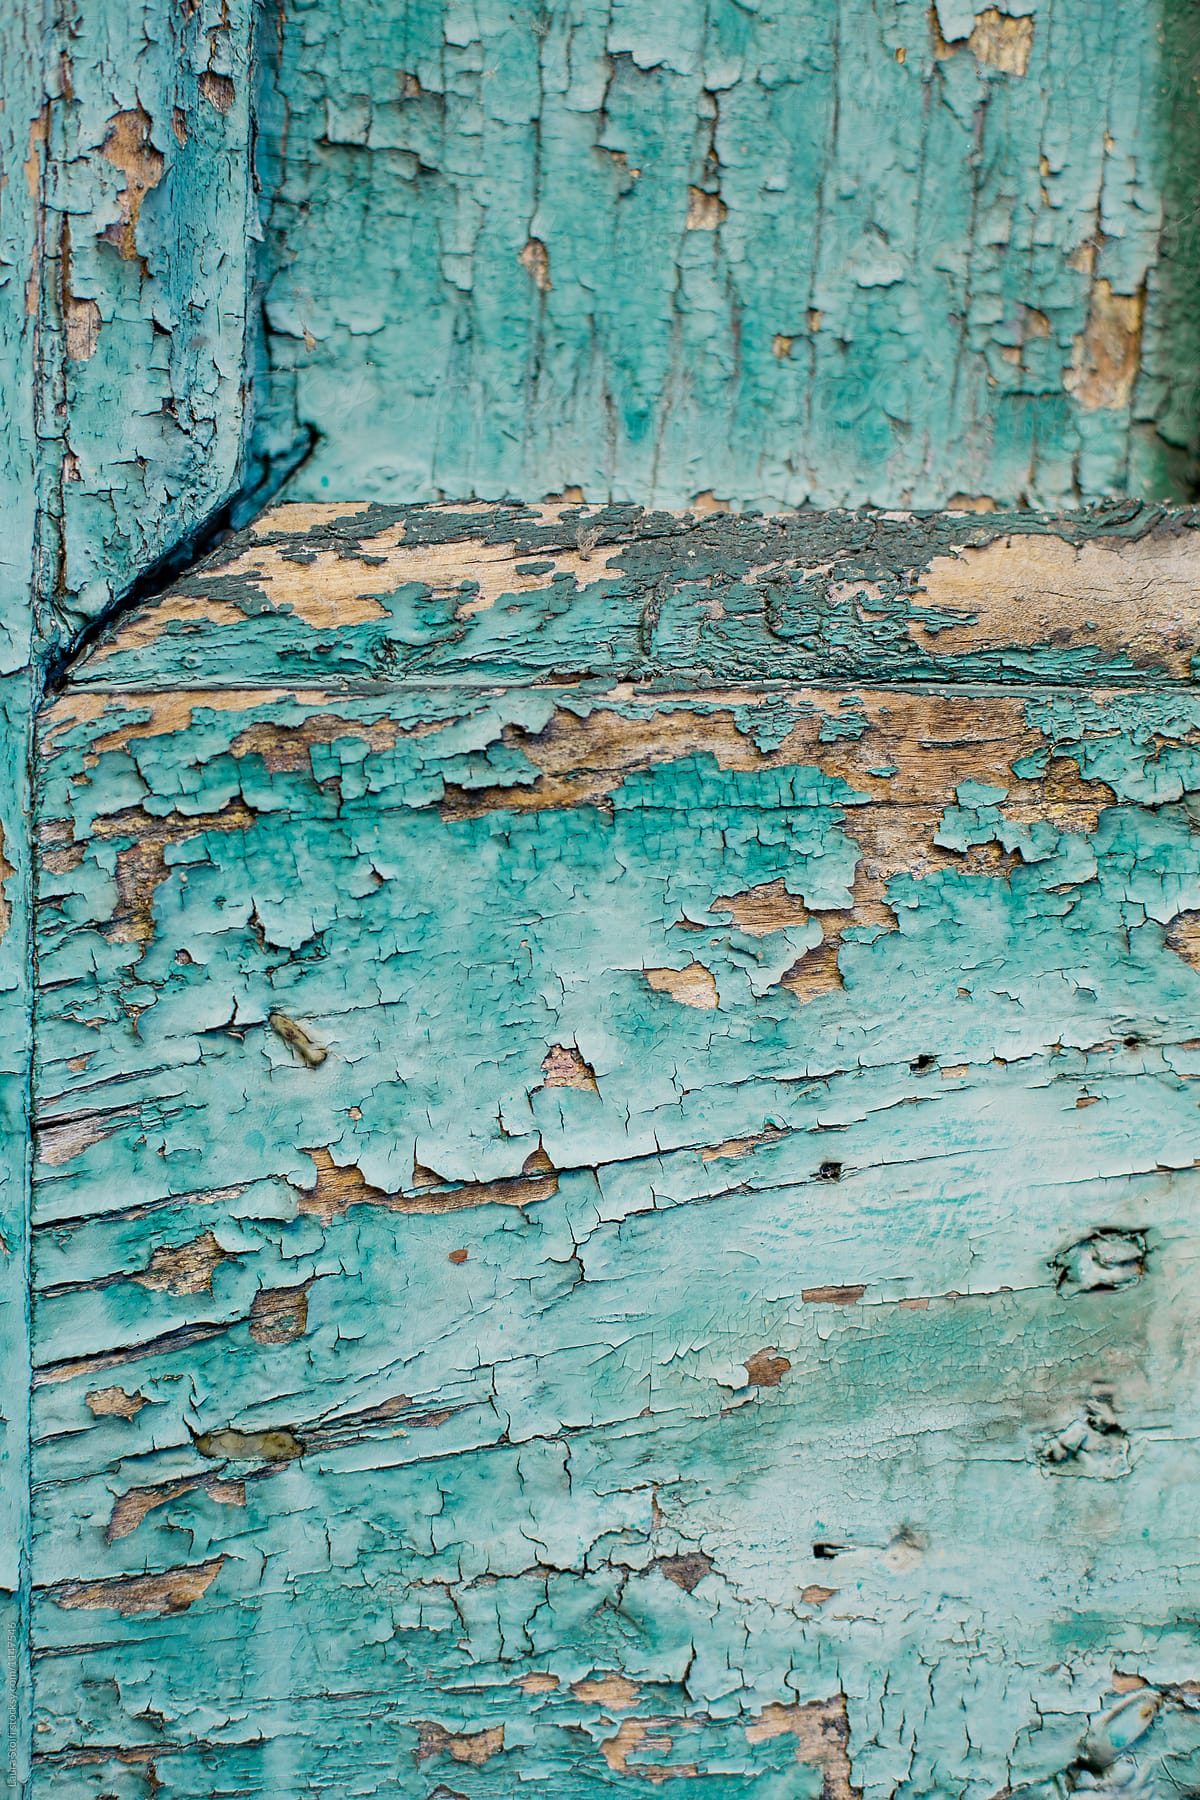 Blue paint flaking off from wooden surface